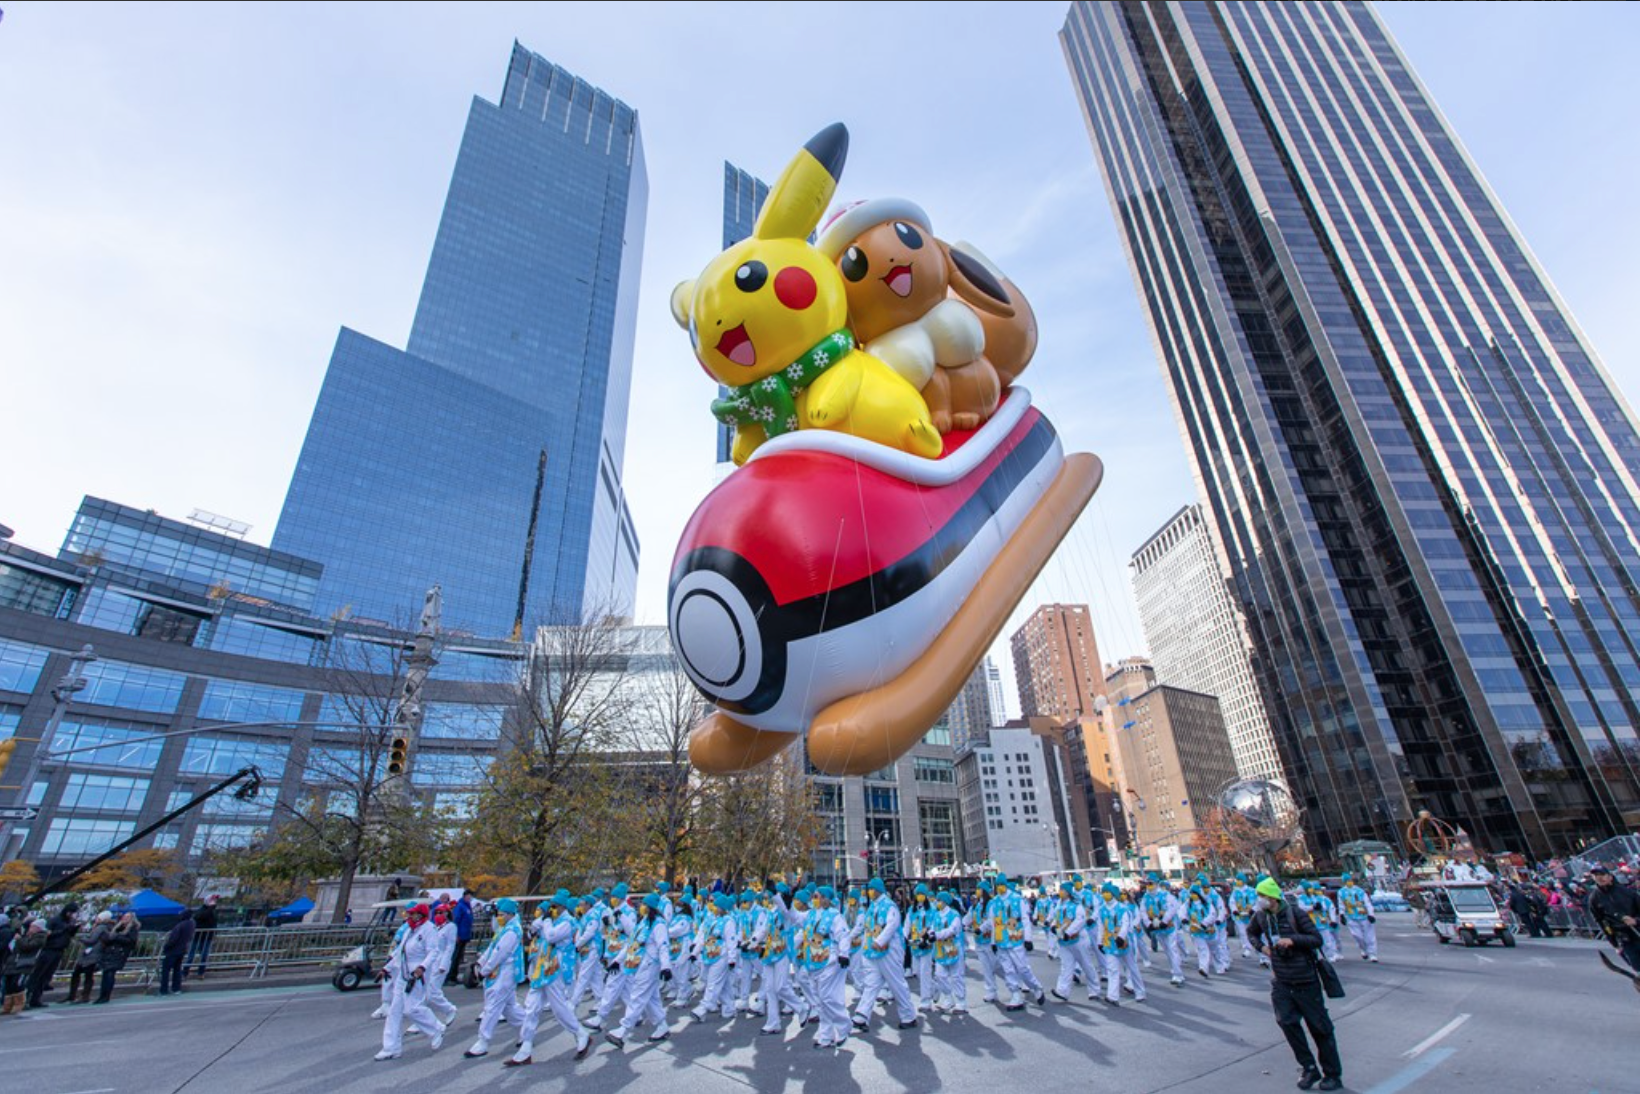 Pikachu and Eevee at the Macy's Thanksgiving Day Parade